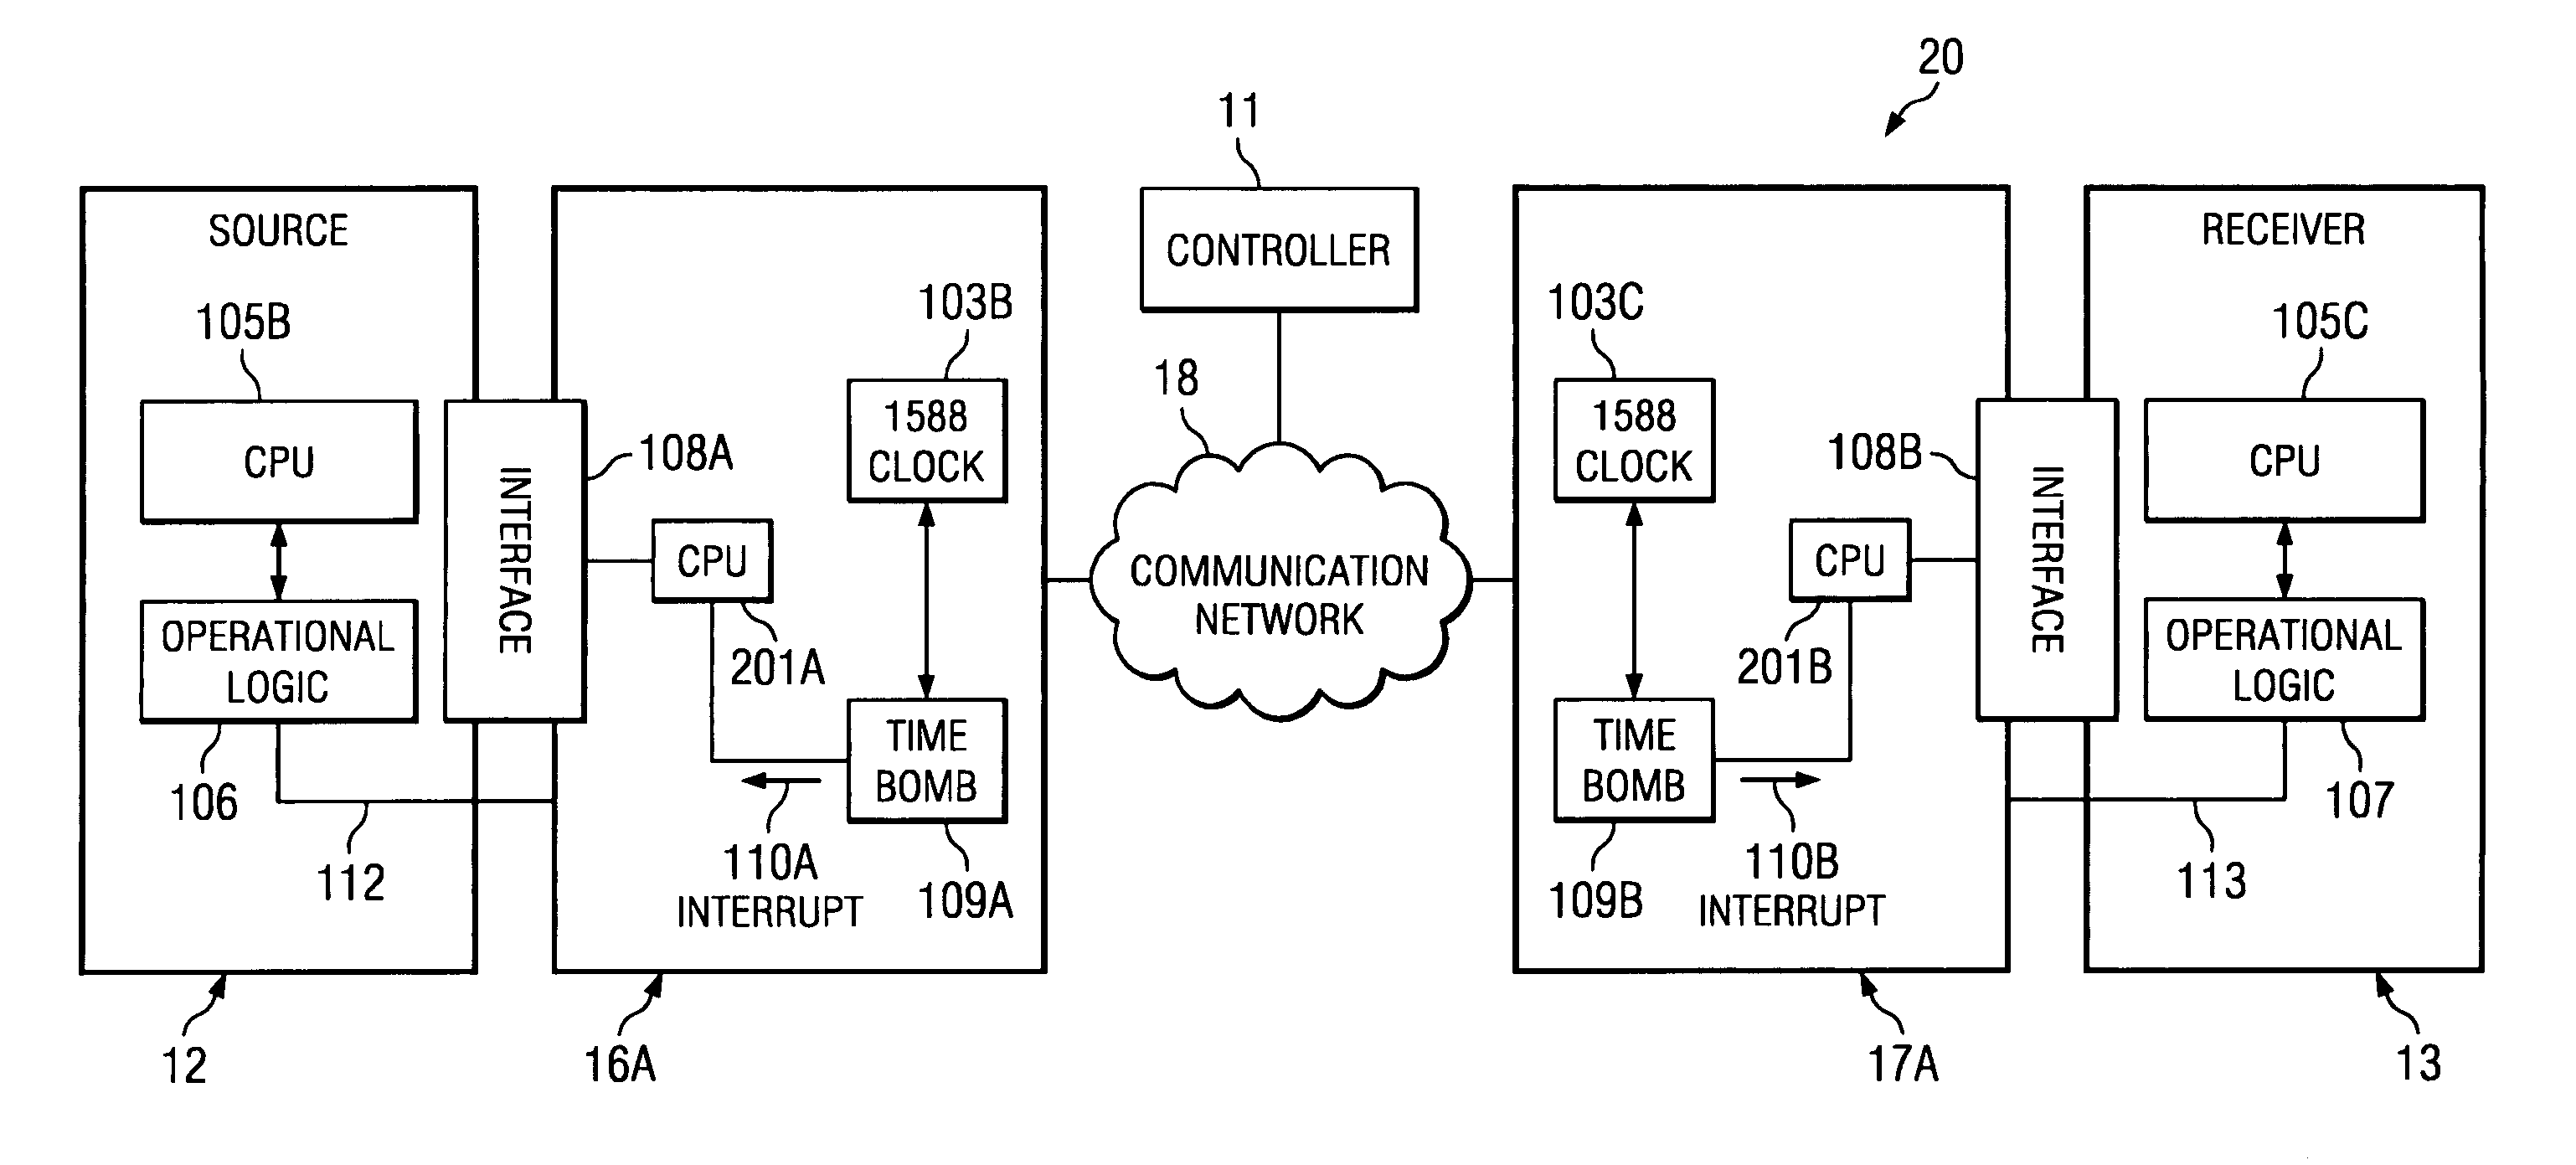 Add-on module for synchronizing operations of a plurality of devices